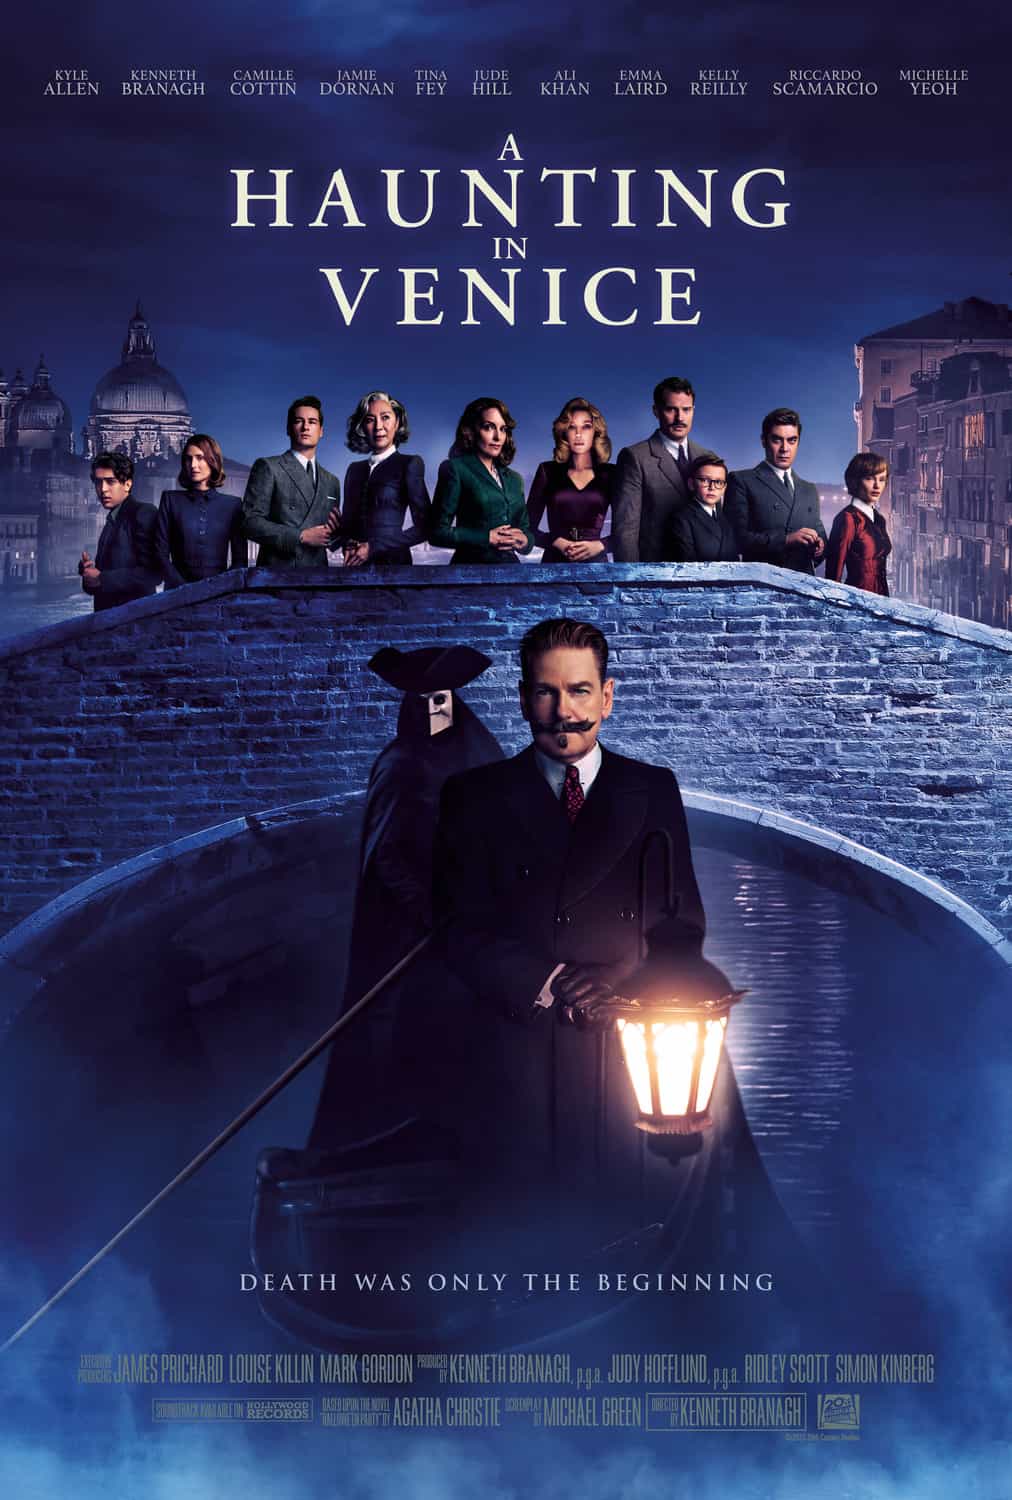 Check out the new trailer and poster for upcoming movie A Haunting In Venice which stars Kenneth Branagh and Jamie Dornan - movie UK release date 15th September 2023 #ahauntinginvenice